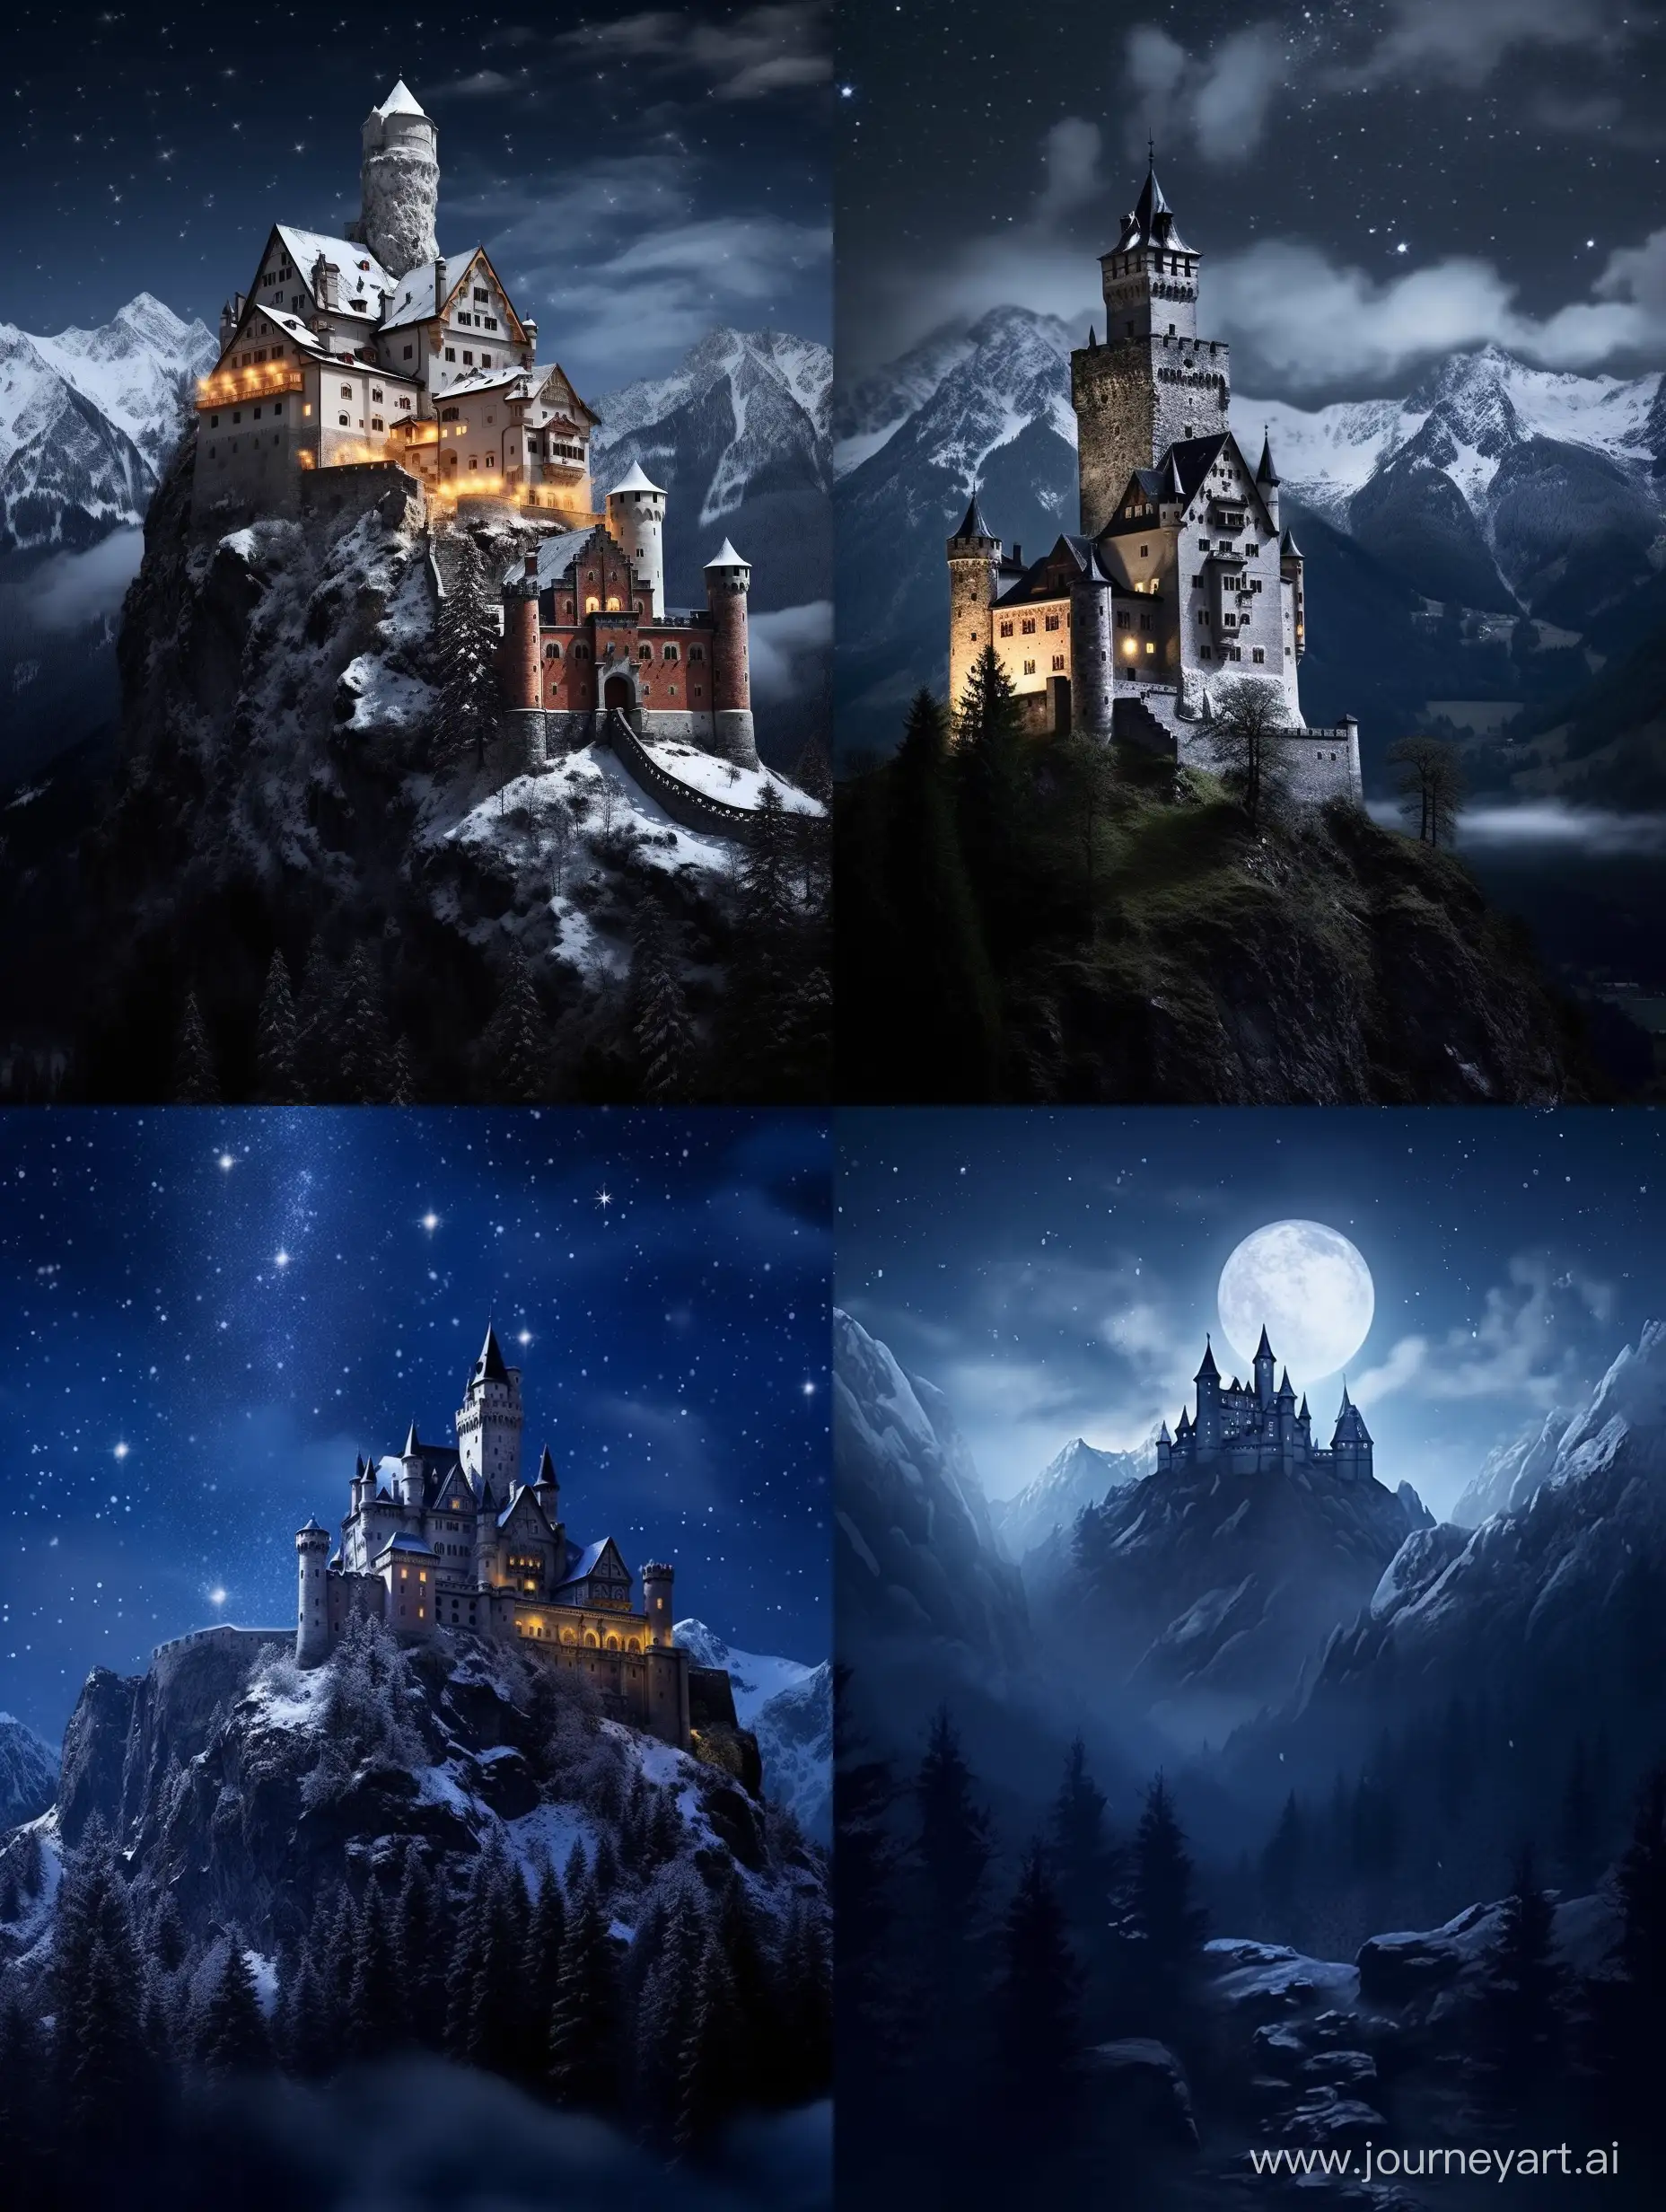 Create a 4K high-quality, portrait mode wallpaper suitable for phone screens: depict a dark, mysterious castle on a mountain, under a star-filled night sky. Include a sense of horror and isolation with a narrow road leading to the castle. Highlight a princess gazing out from a high window in the castle. Ensure the resolution and size are optimized for phone wallpapers, focusing on detailed textures and elements for a visually striking phone background, capturing a blend of horror and enchantment.